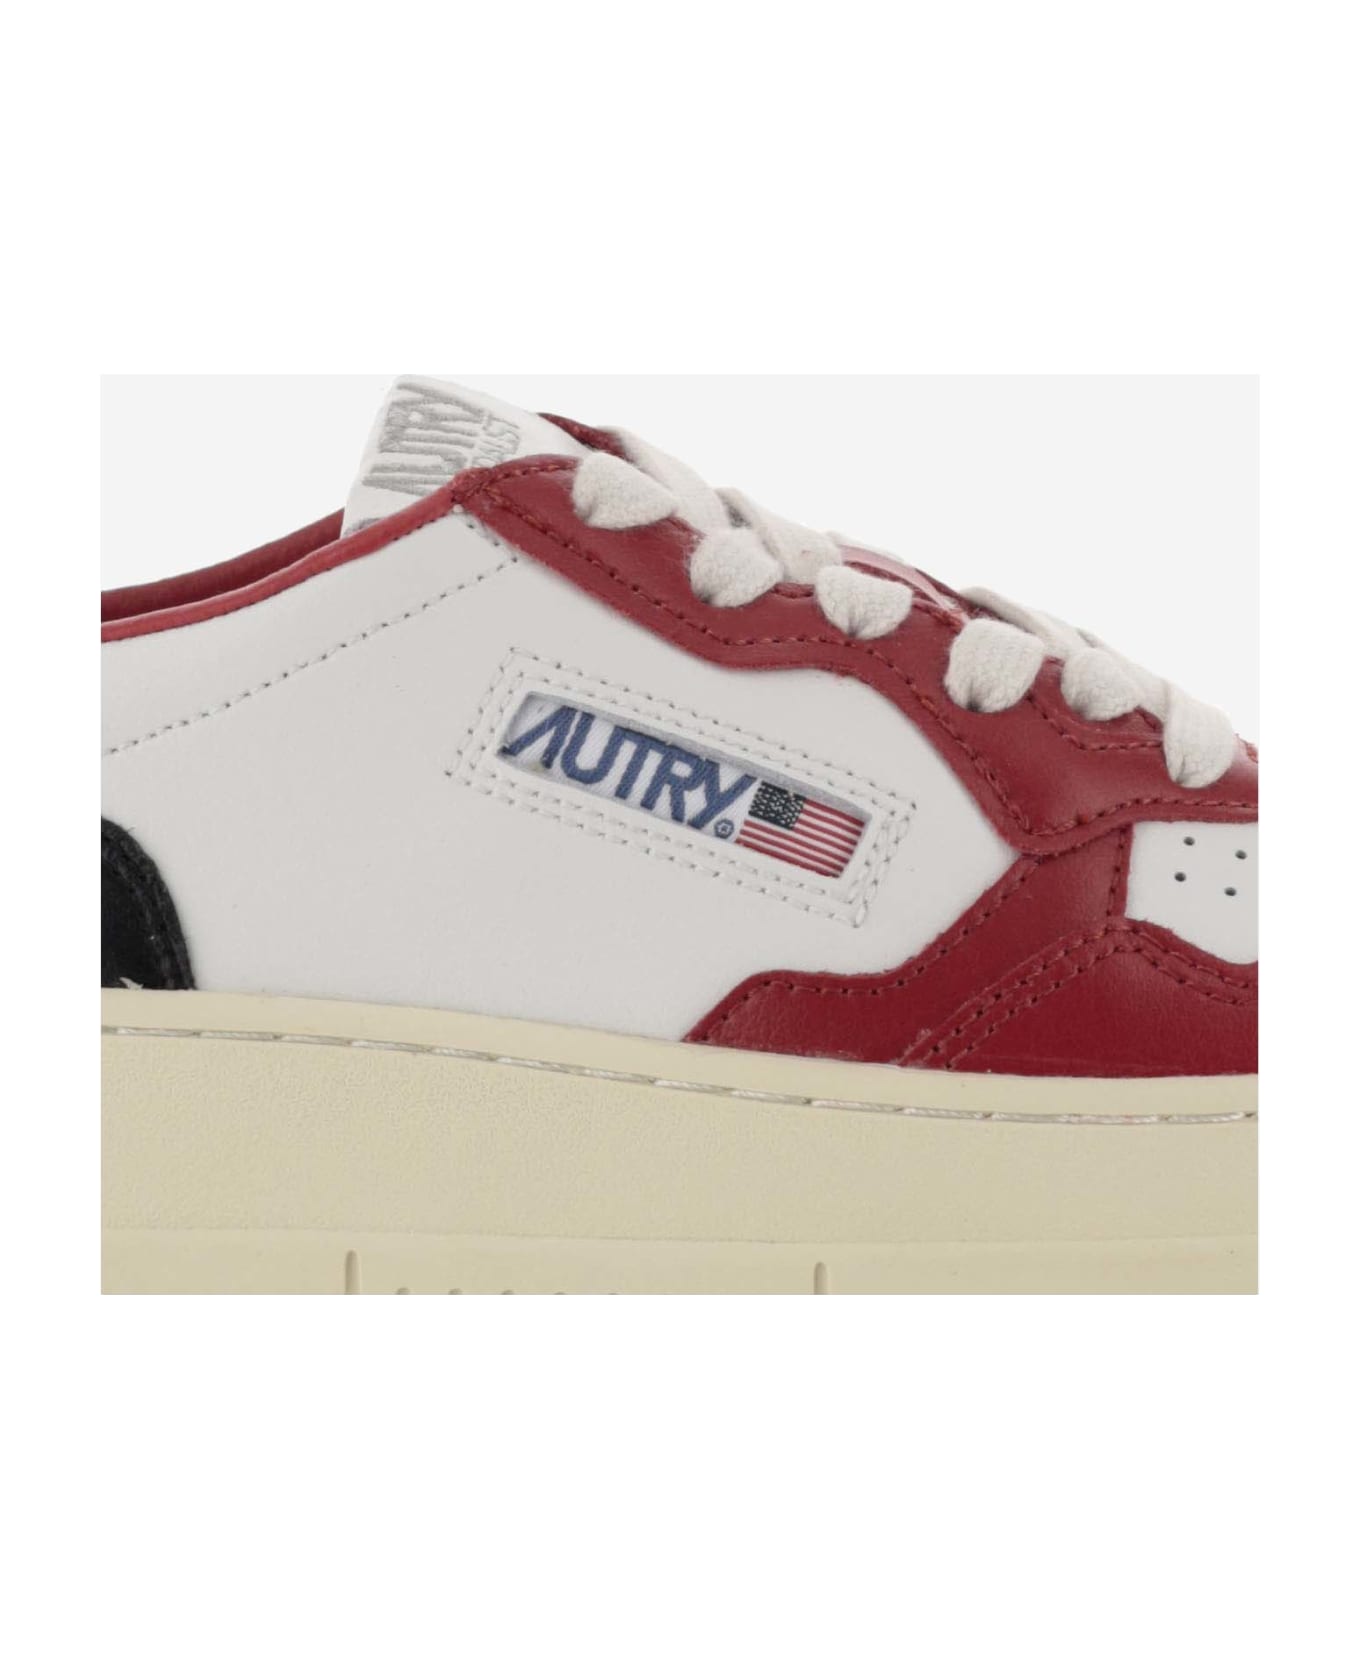 Autry Low Medalist Sneakers - Bianco/Rosso